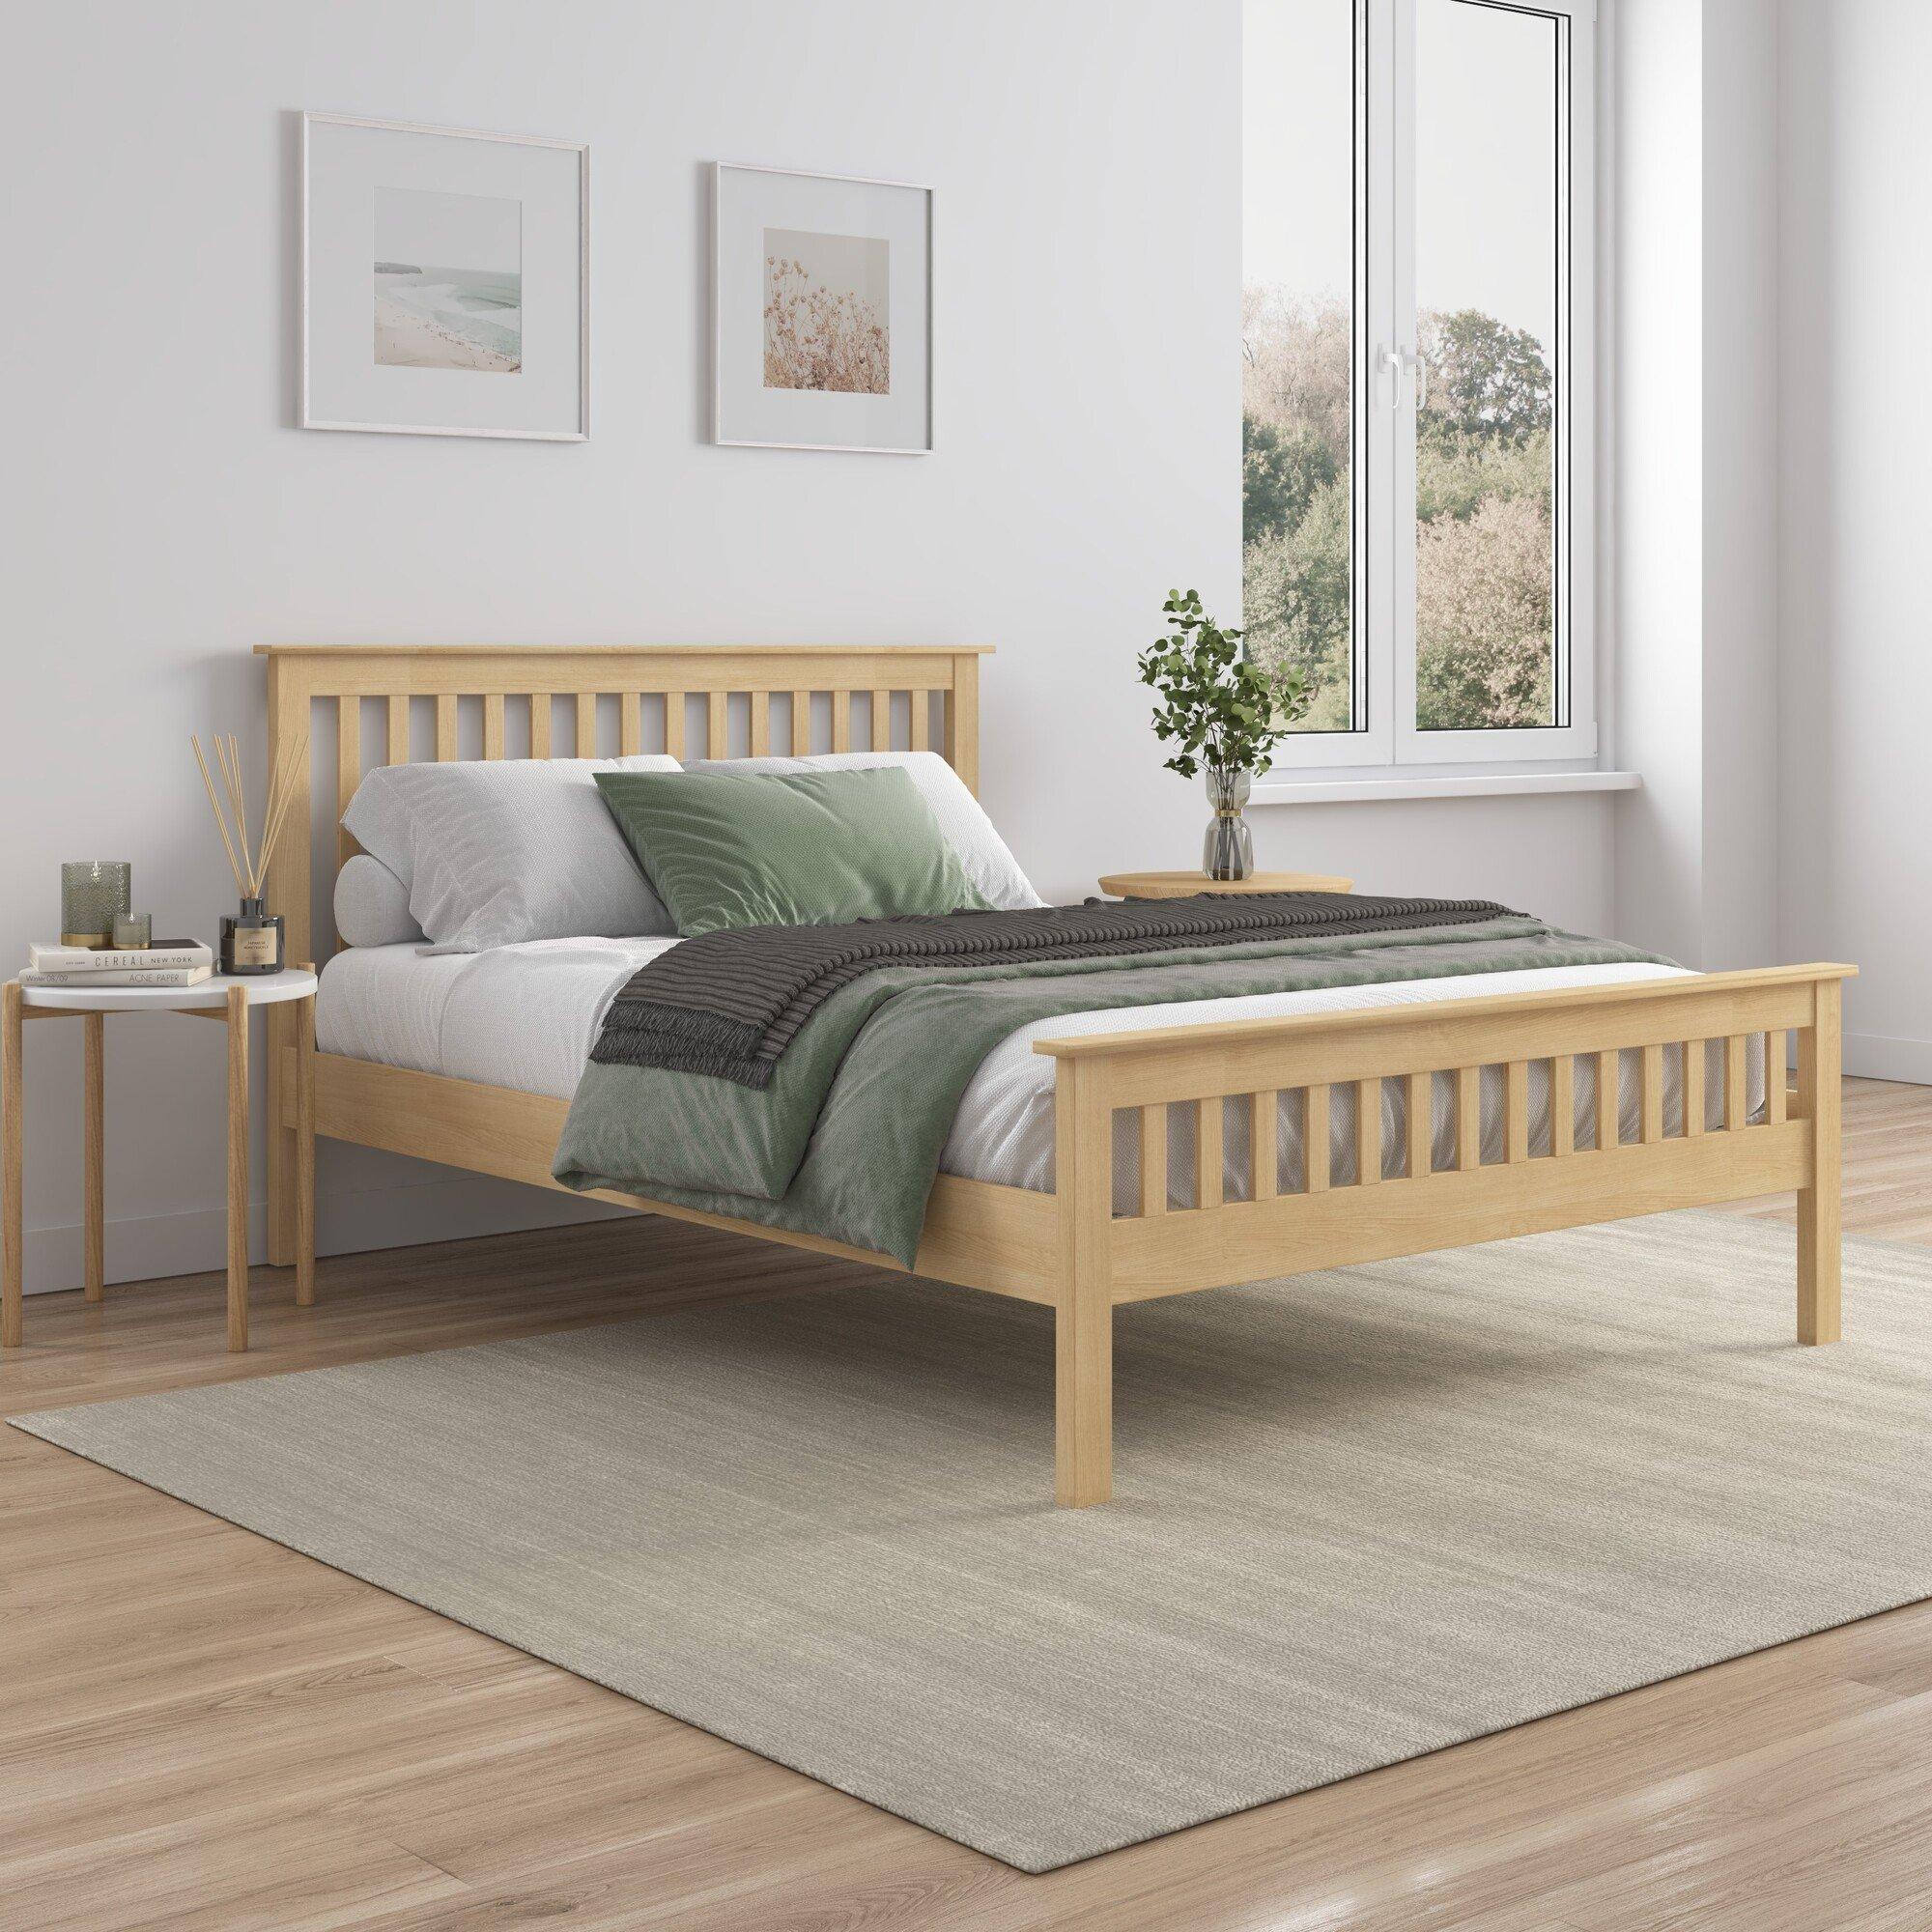 Pitlochry Solid Wooden Oak Shaker Style Bed Frame